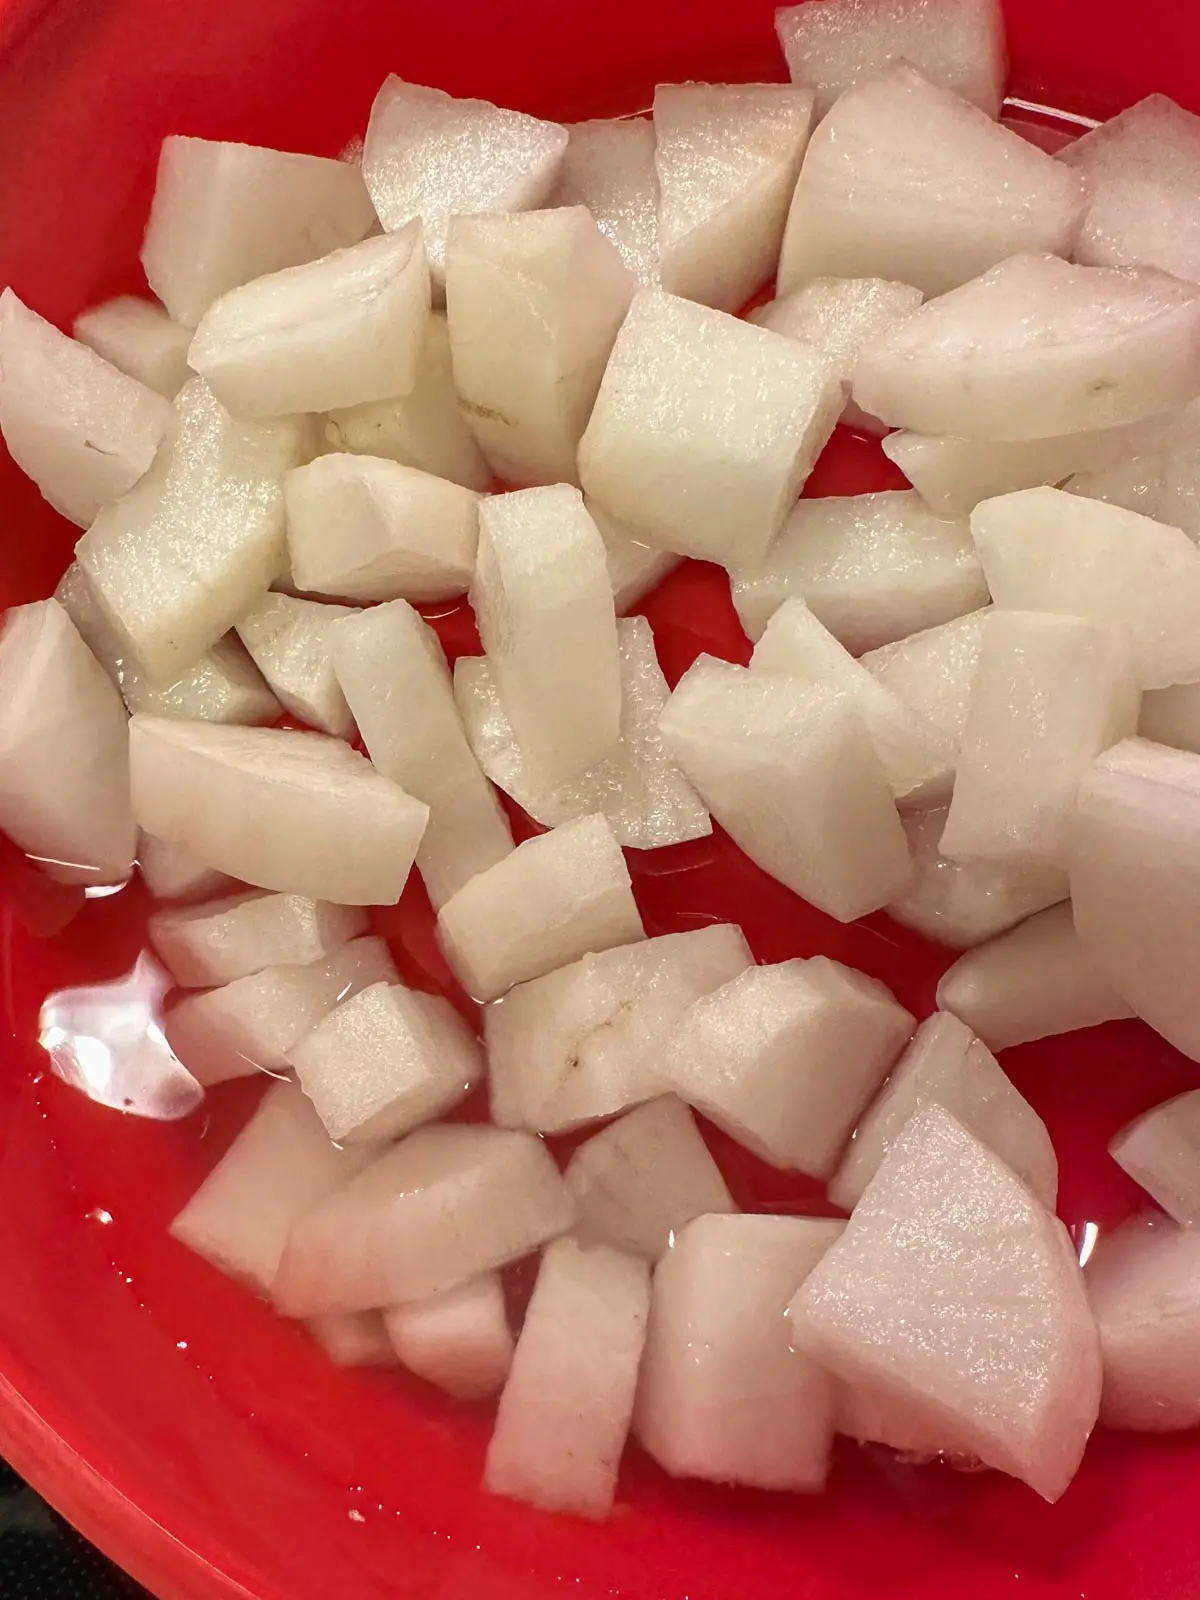 Cubed pieces of daikon radish with juices from the radish which have been released, in a red bowl.